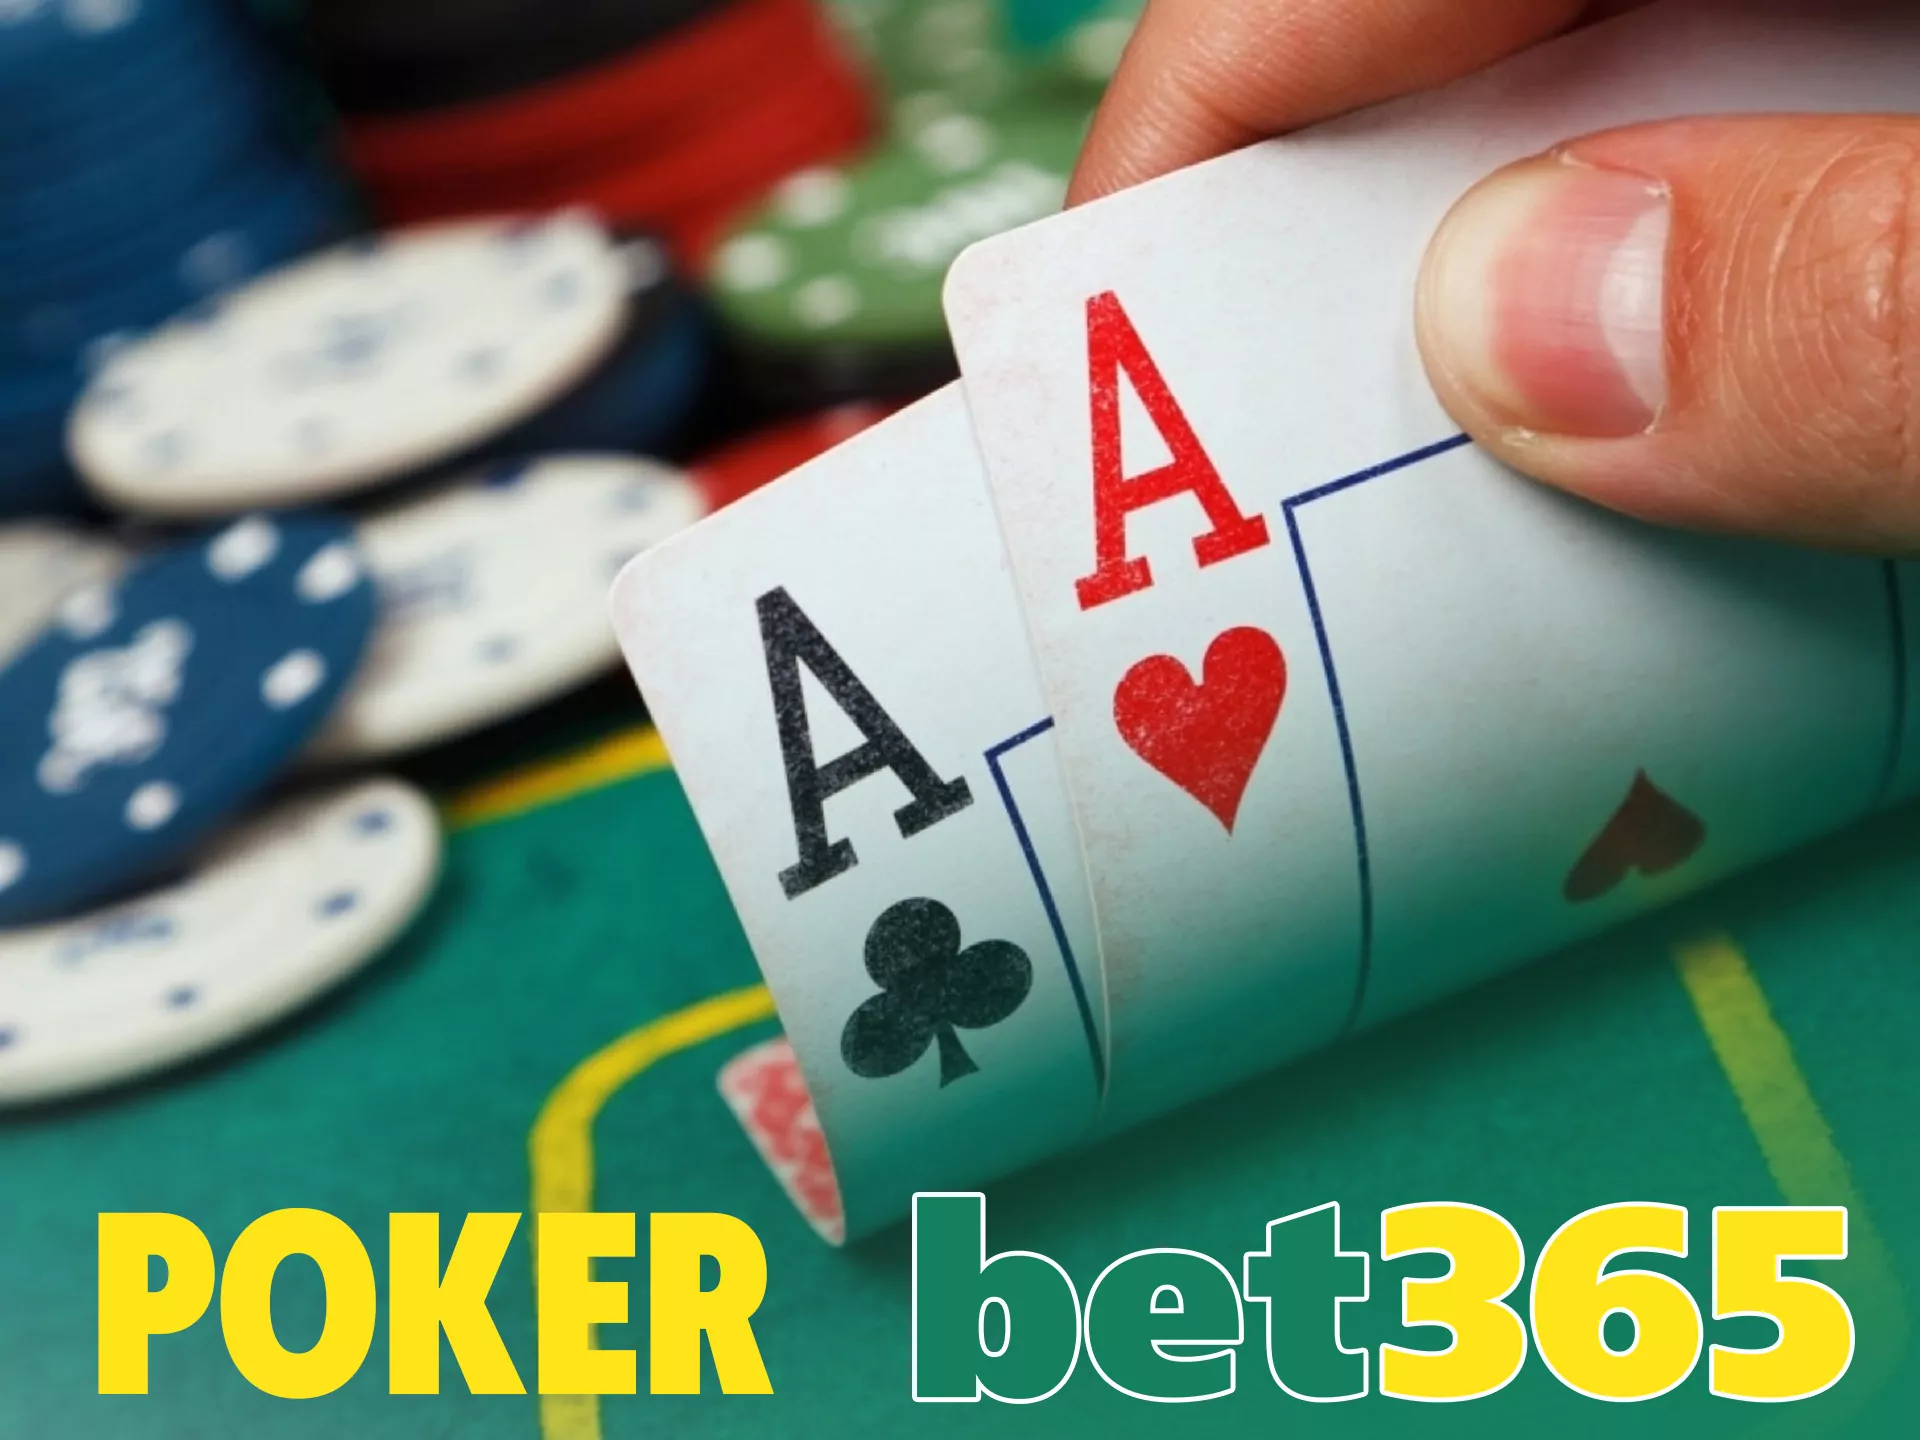 Play poker with real people at Bet365.